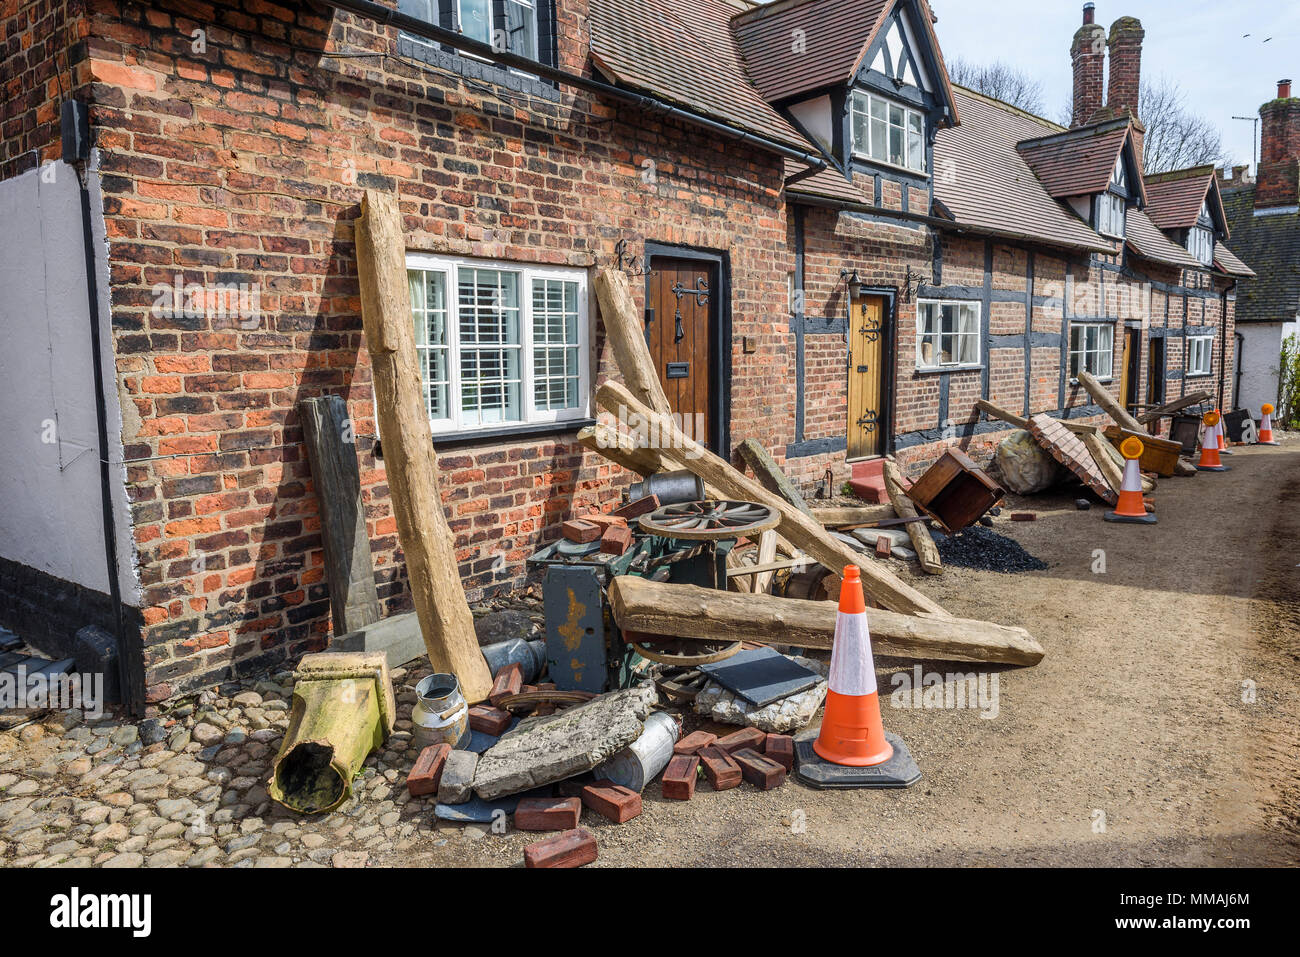 Props and debris litter alongside cottages for  the new BBC drama 'War Of The Worlds' by HG Wells,filmed at Great Budworth village, Cheshire, April 20 Stock Photo